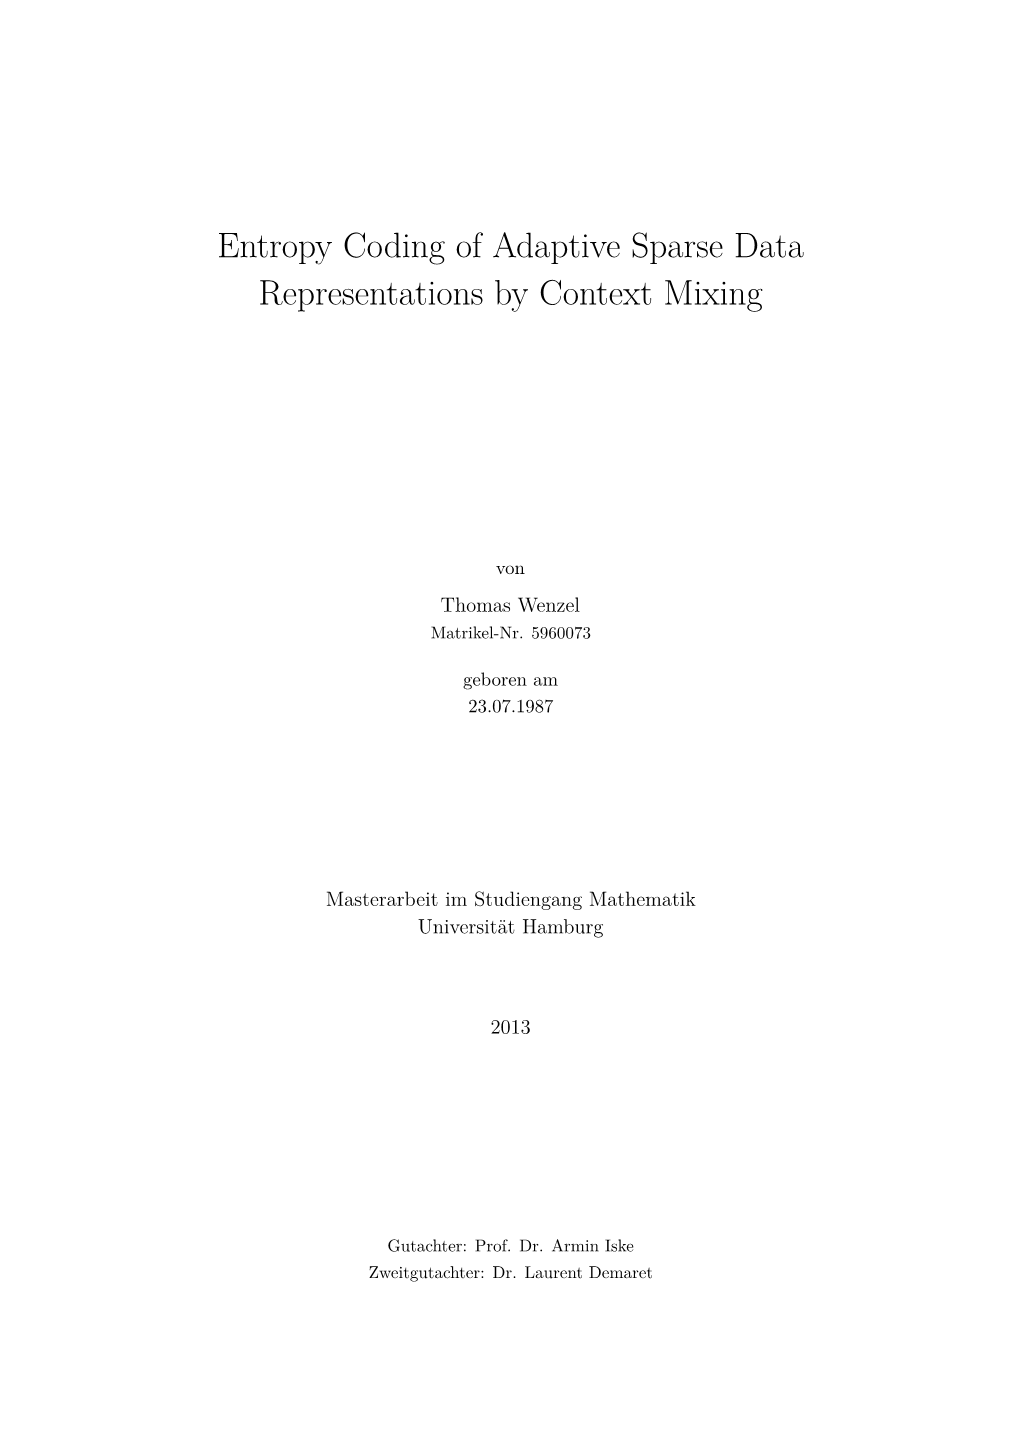 Entropy Coding of Adaptive Sparse Data Representations by Context Mixing